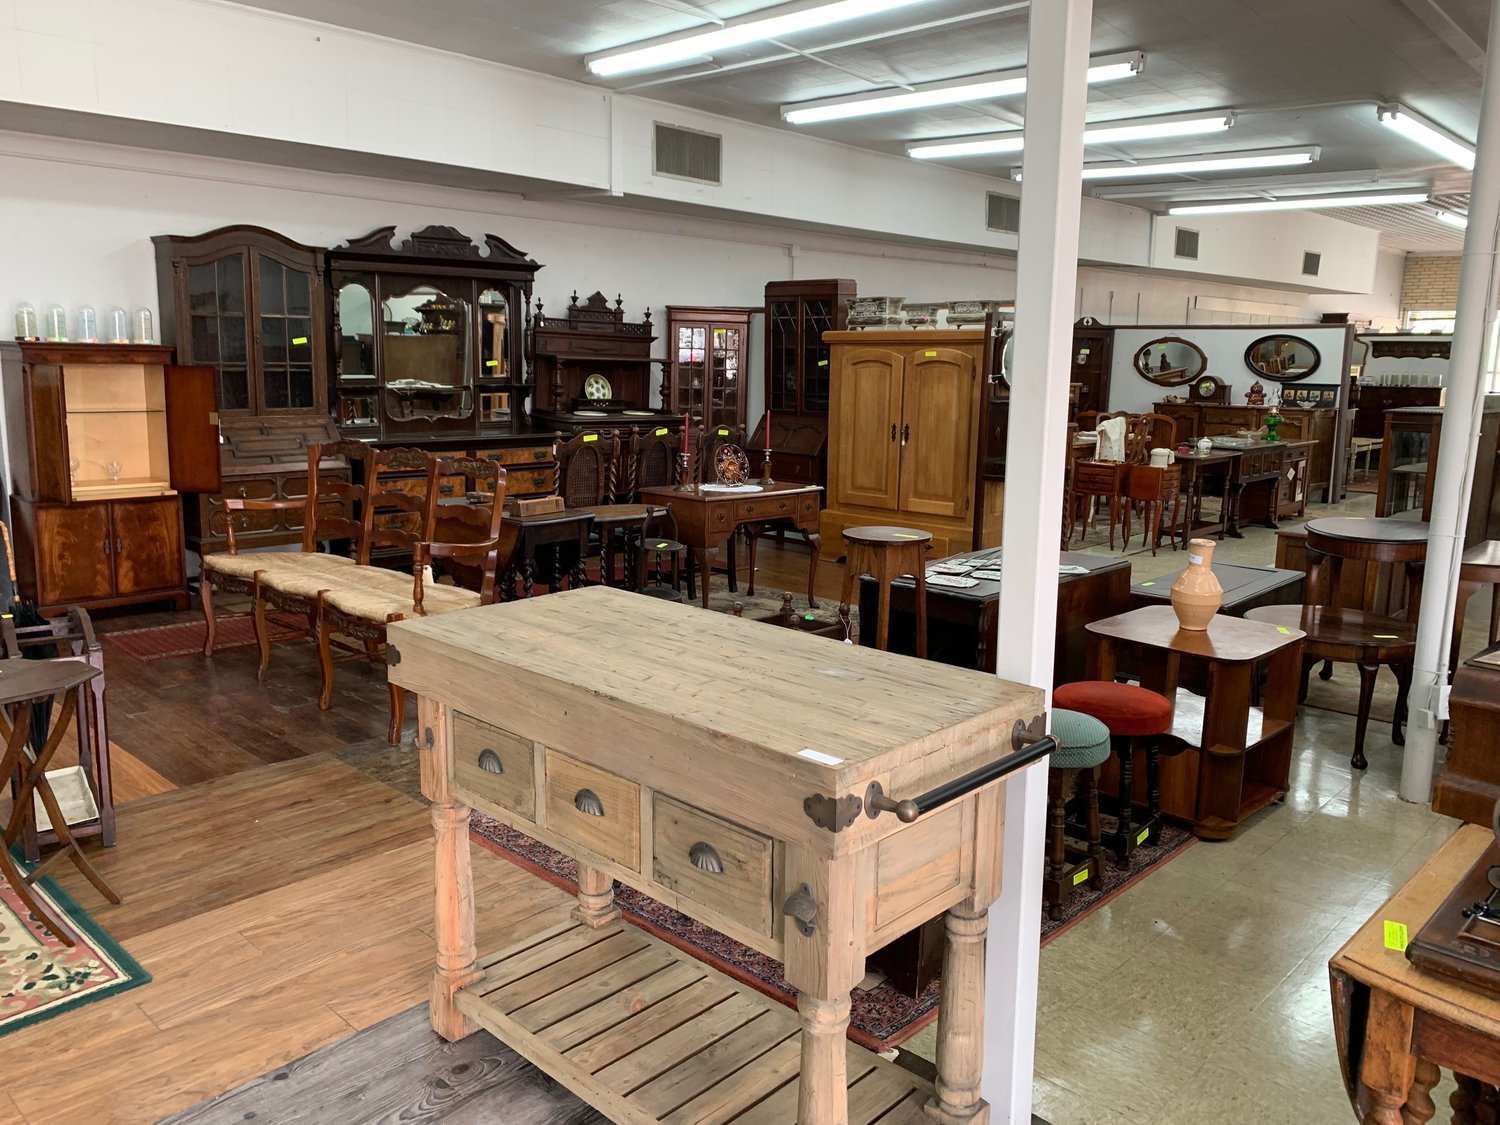 Marketplace on Main’s furniture is displayed throughout the building before opening day on July 5. The shop is located 105 S. Main St. in Quitman.